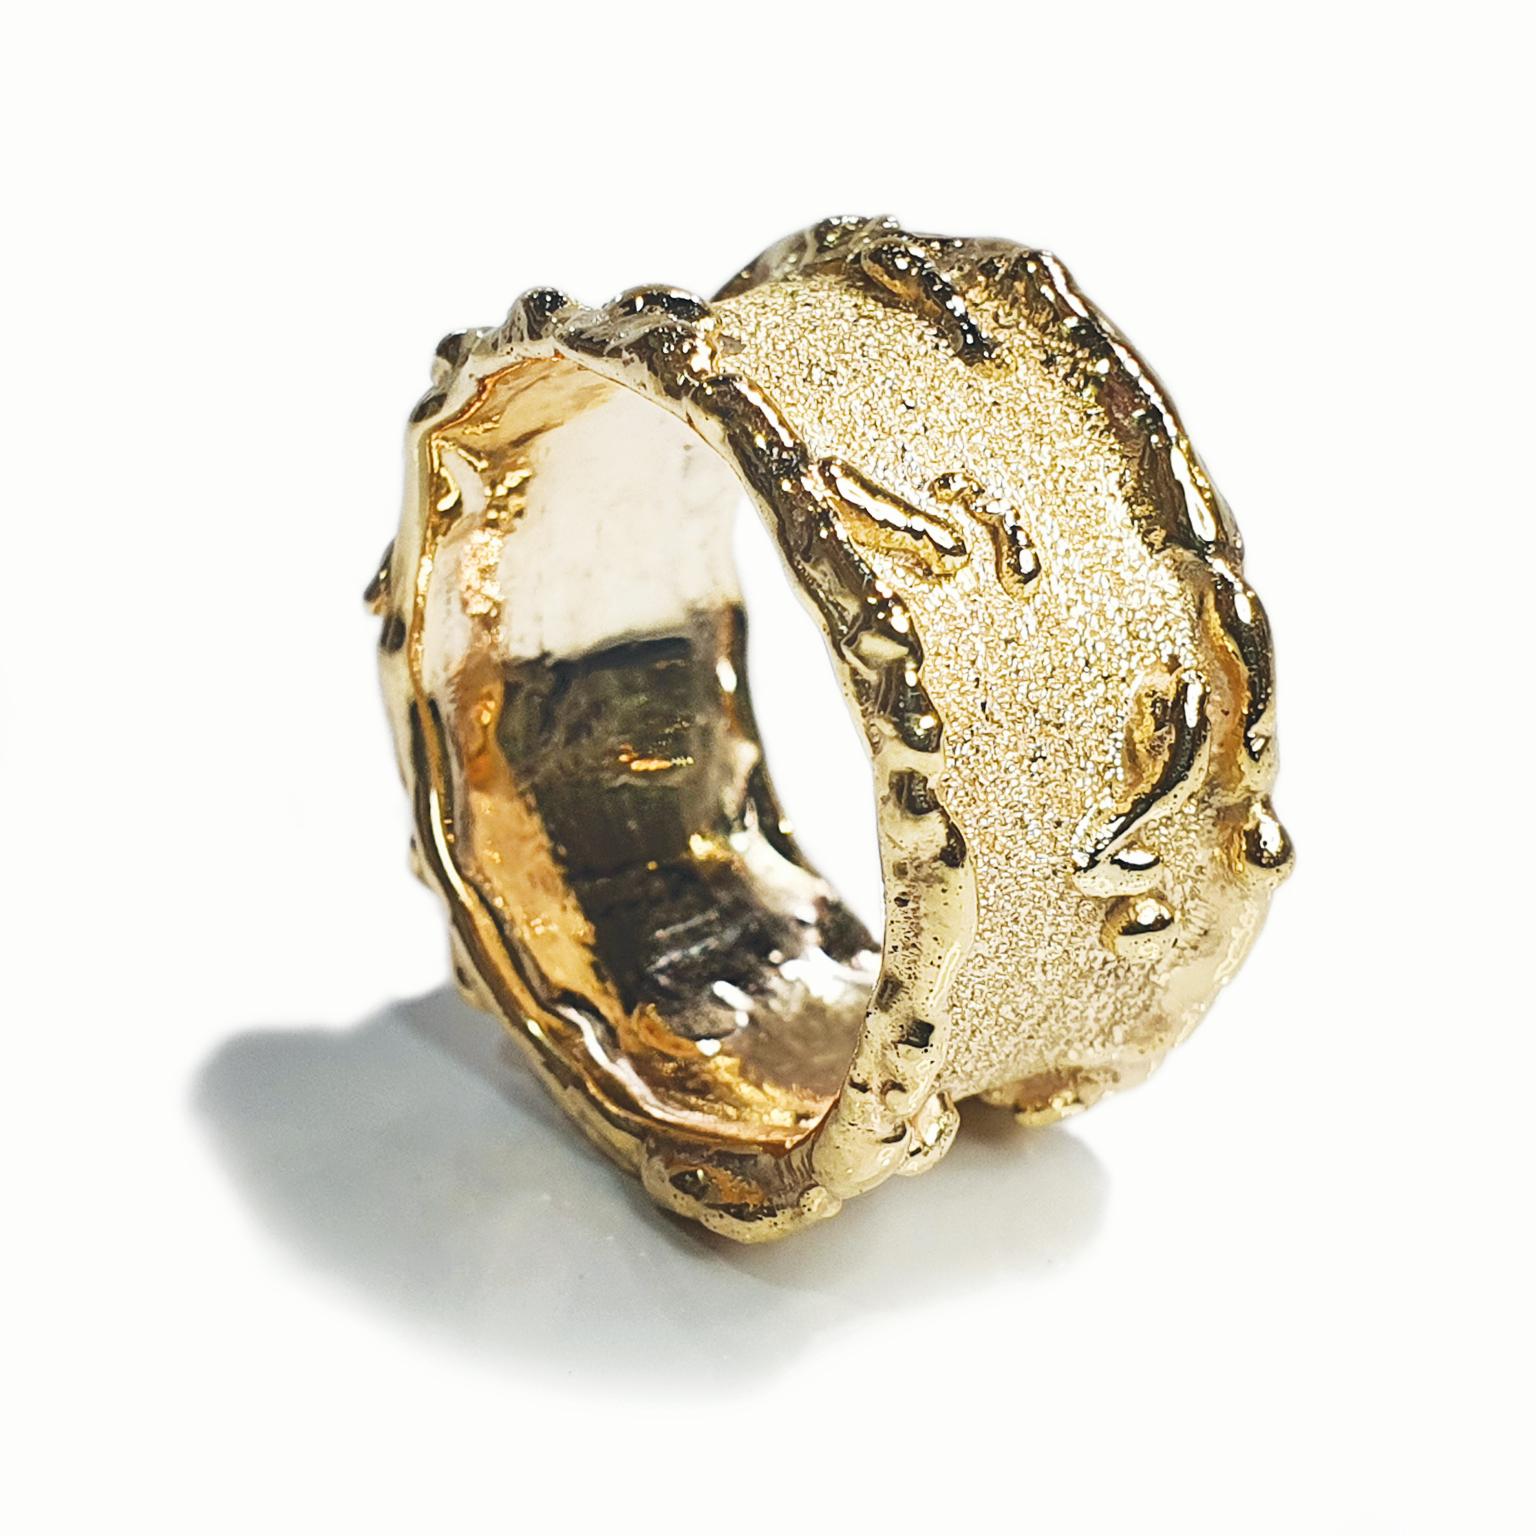 Paul Amey’s Gold Molten Edge ring was hand crafted from 9K Yellow Gold. The ring features a 11mm wide band, molten drips and is finished with Paul Amey’s signature texture. The ring weights 4.9 grams and is currently size O (GB) or 7.5 (US) but can